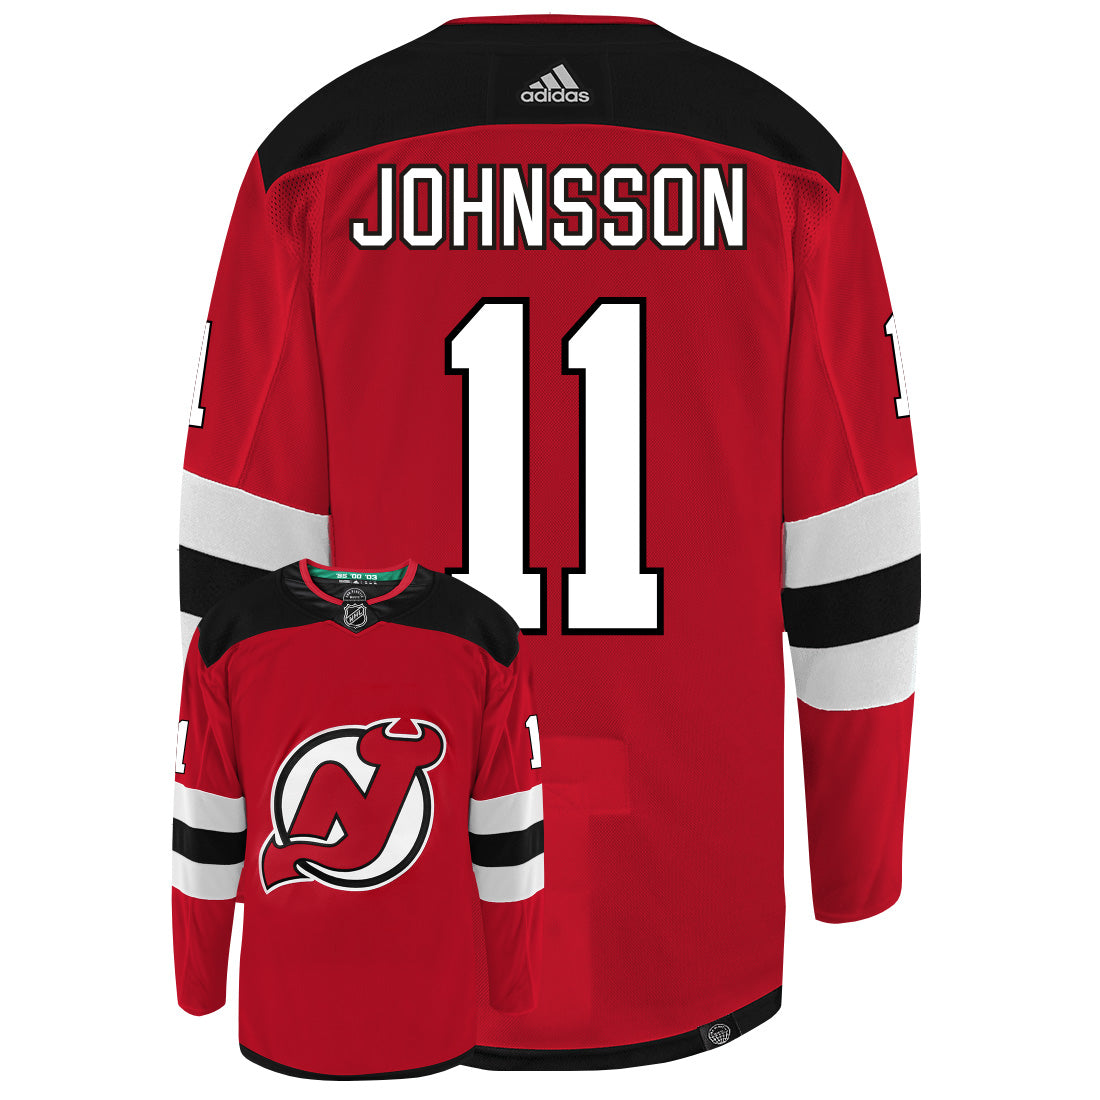 Andreas Johnsson New Jersey Devils Adidas Primegreen Authentic NHL Hockey Jersey - Back/Front View